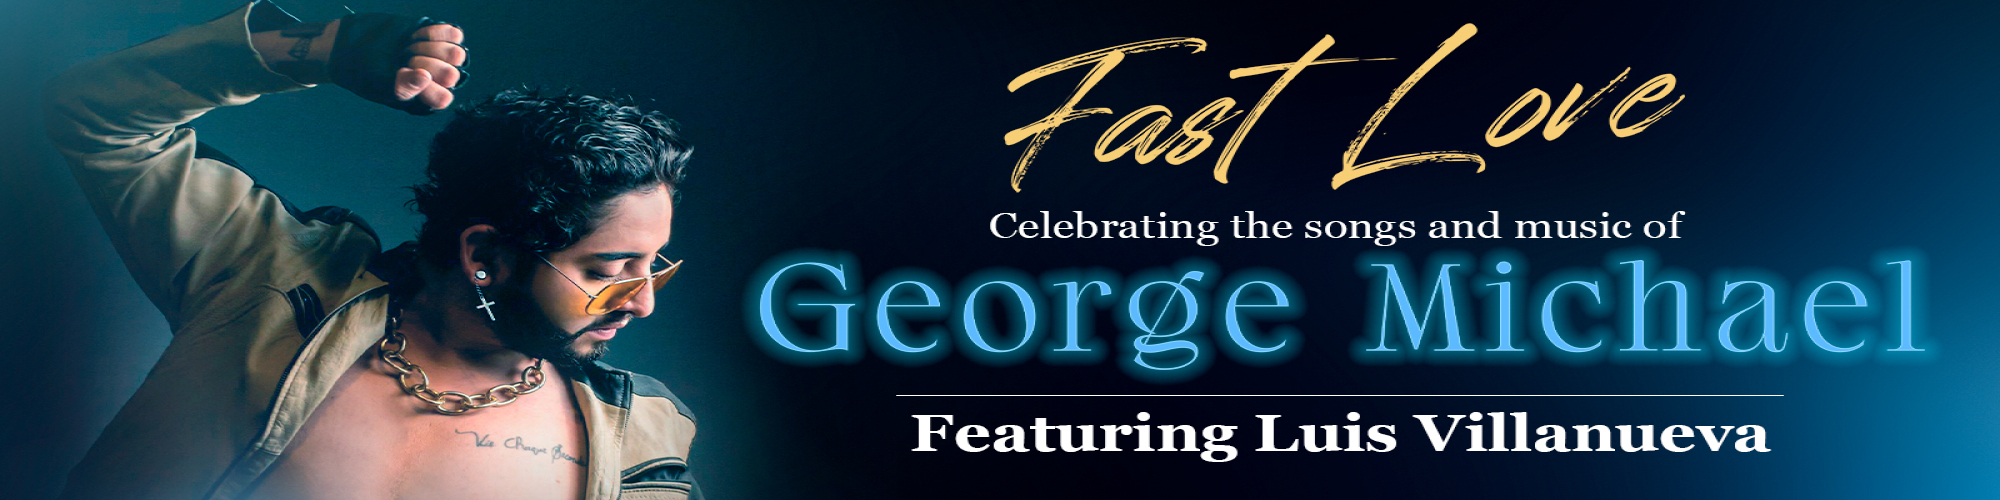 FAST LOVE  - A Celebration of the Music of George Michael